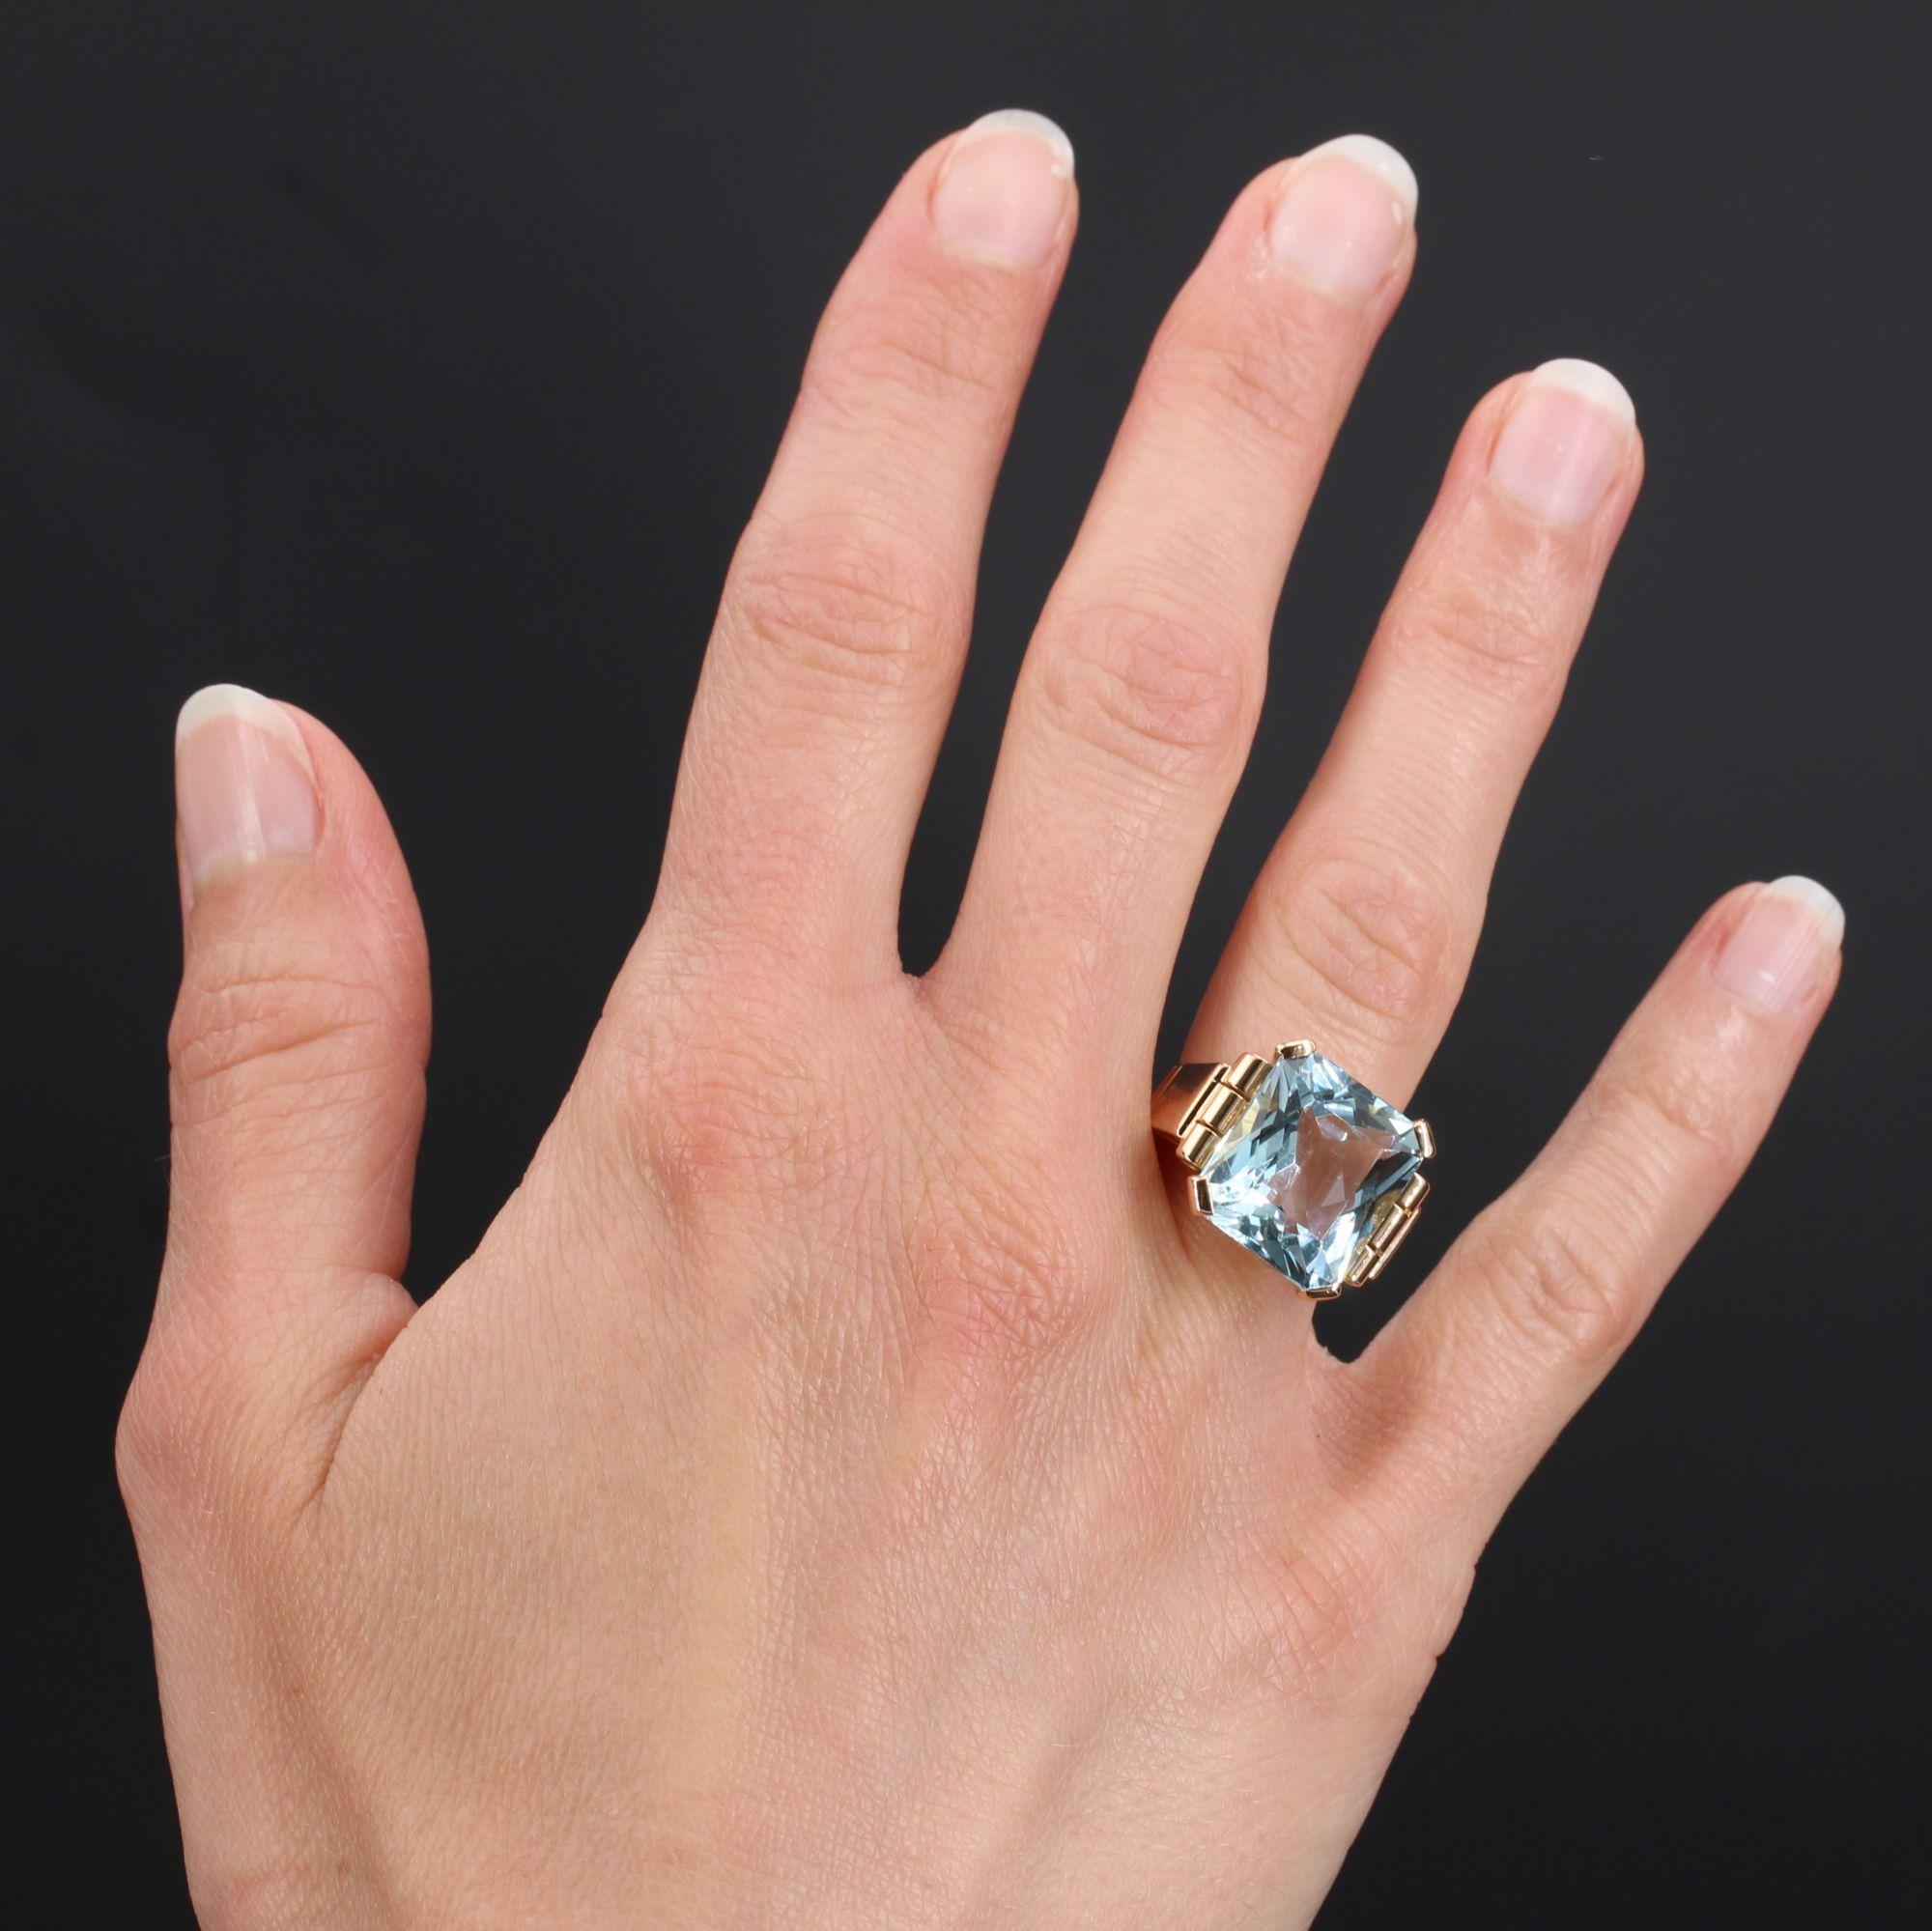 Ring in 18 karat yellow gold.
Splendid ring, it is decorated with four flat claws of an aquamarine degrees- cut. On both sides a scroll gives the departure of the ring. The basket is openwork with geometric patterns.
Aquamarine total weight : 10,50